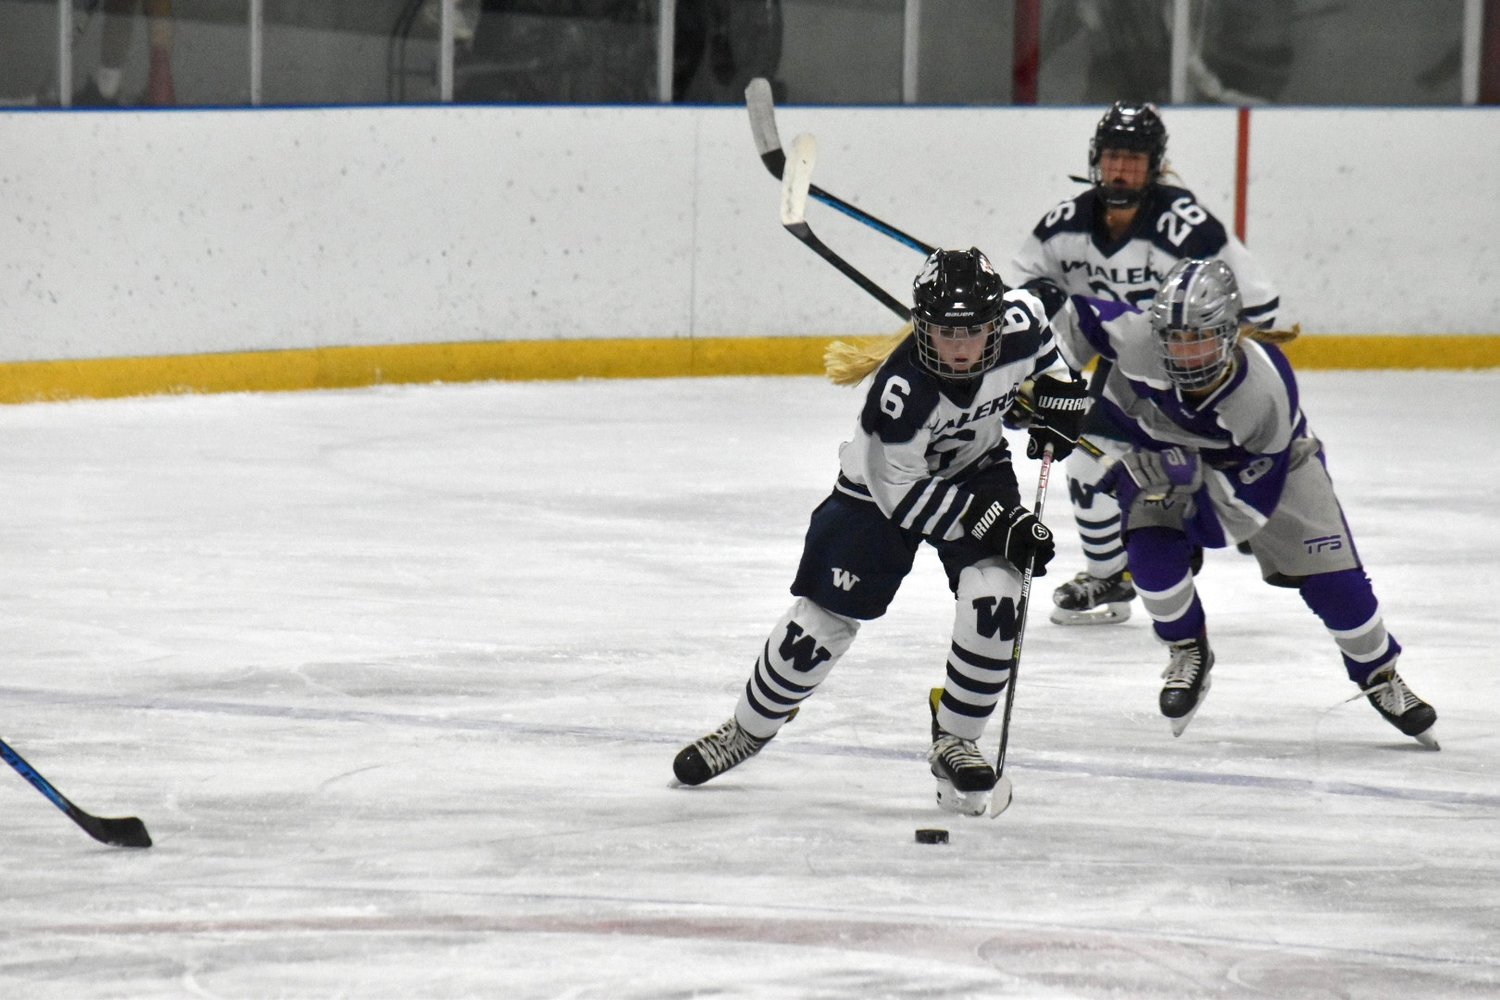 Grace Keane carries the puck during the Whalers’ Jan. 8 game against Martha’s Vineyard. The eighth-grader notched her first varsity point with an assist against Falmouth.